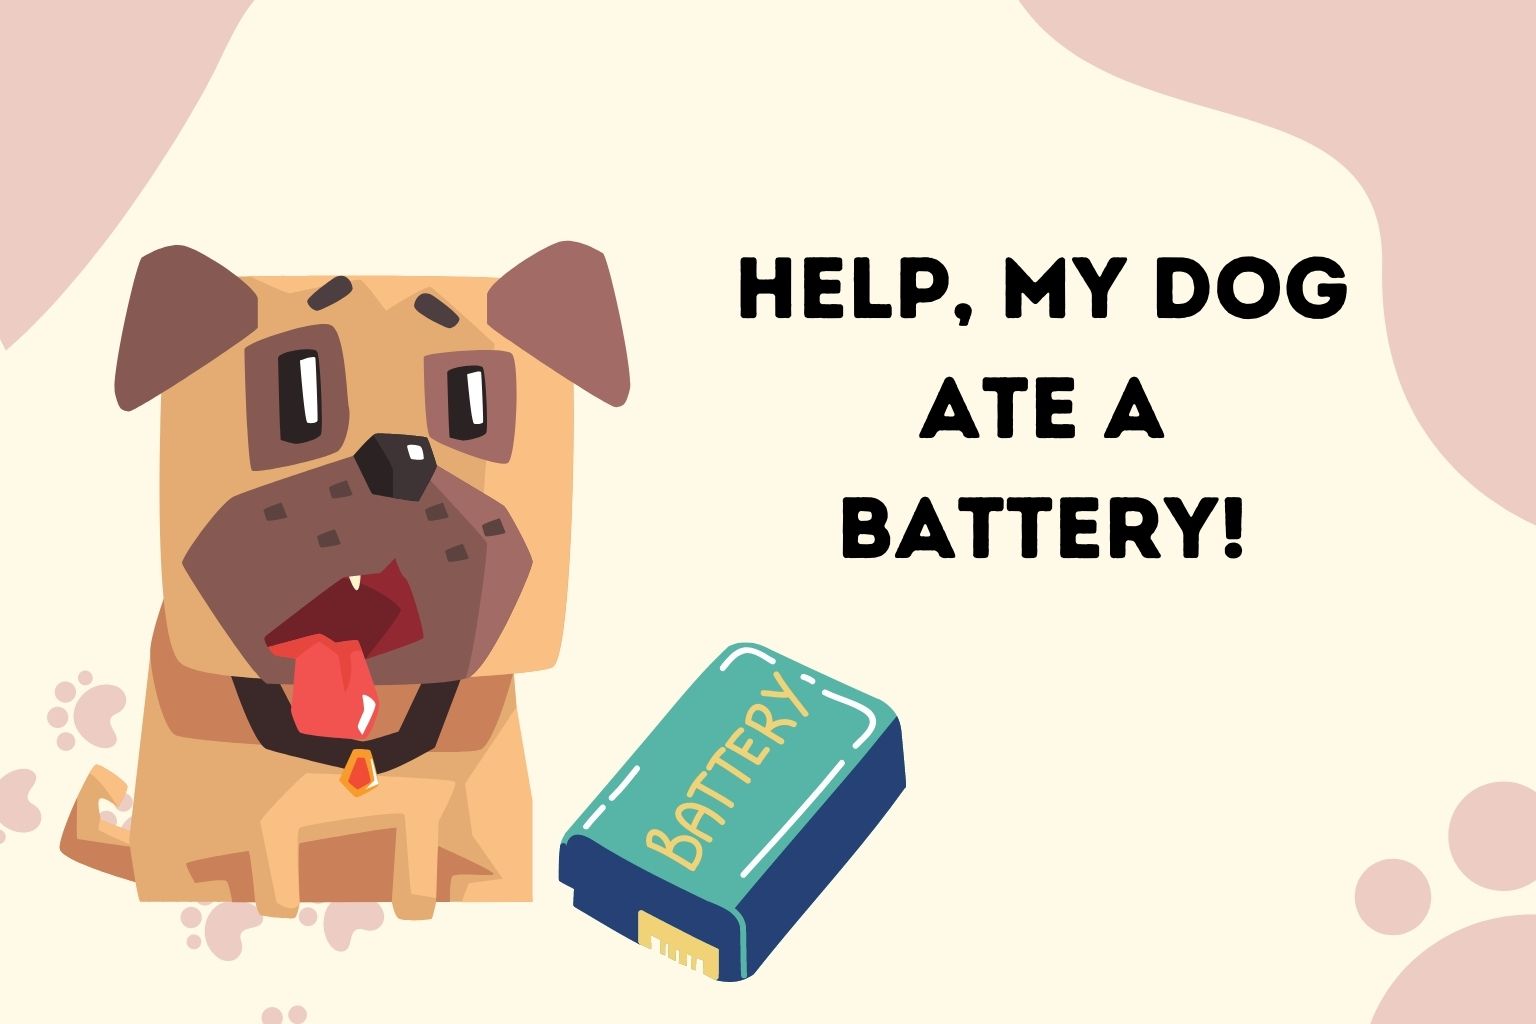 Help, My Dog Ate a Battery!